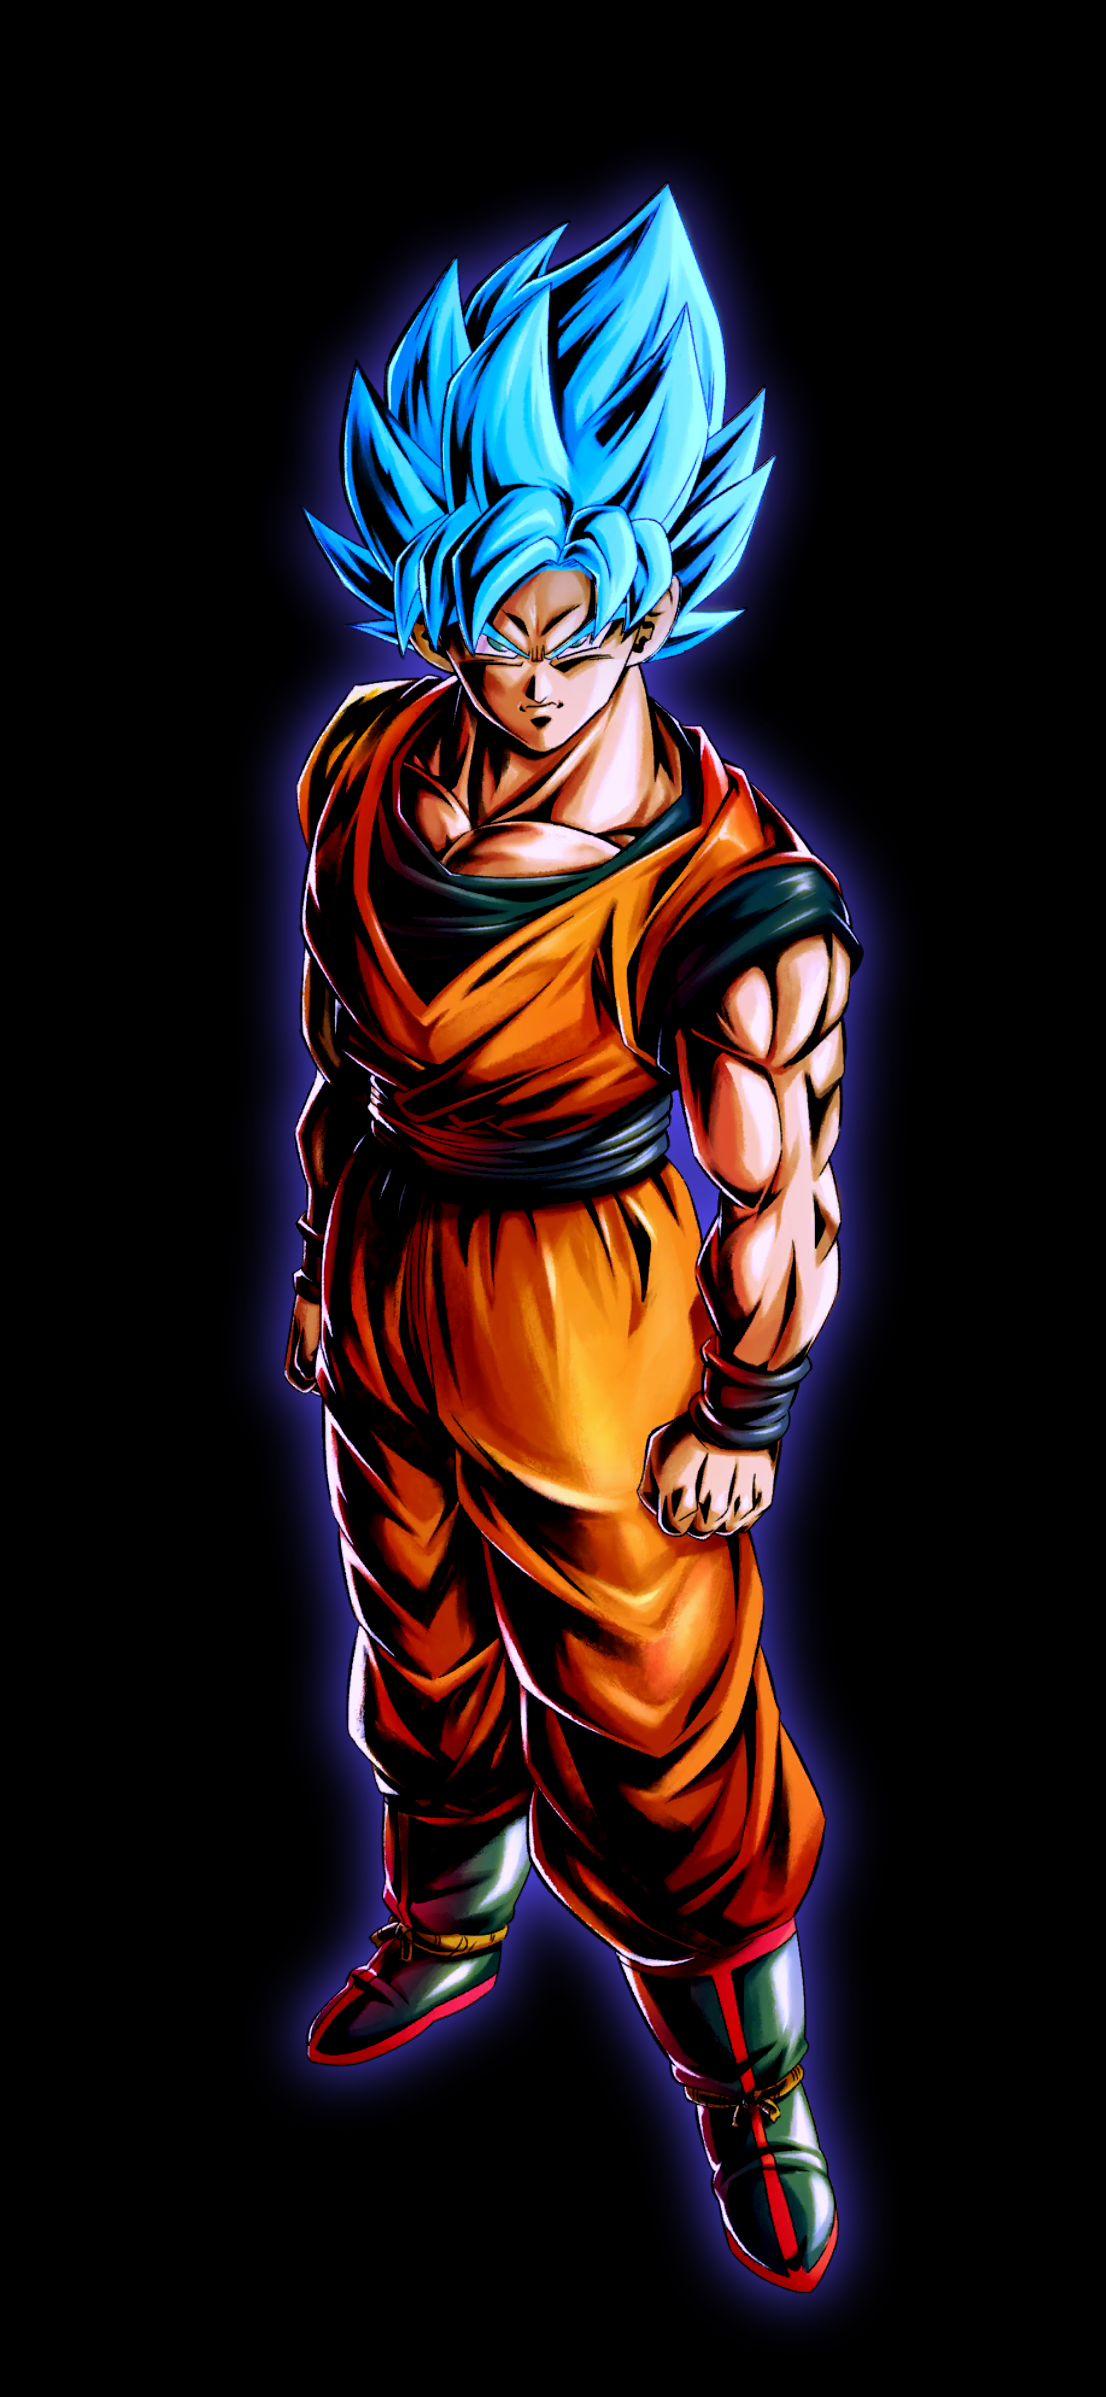 A simple SSGSS Goku wallpaper I wanted to make!